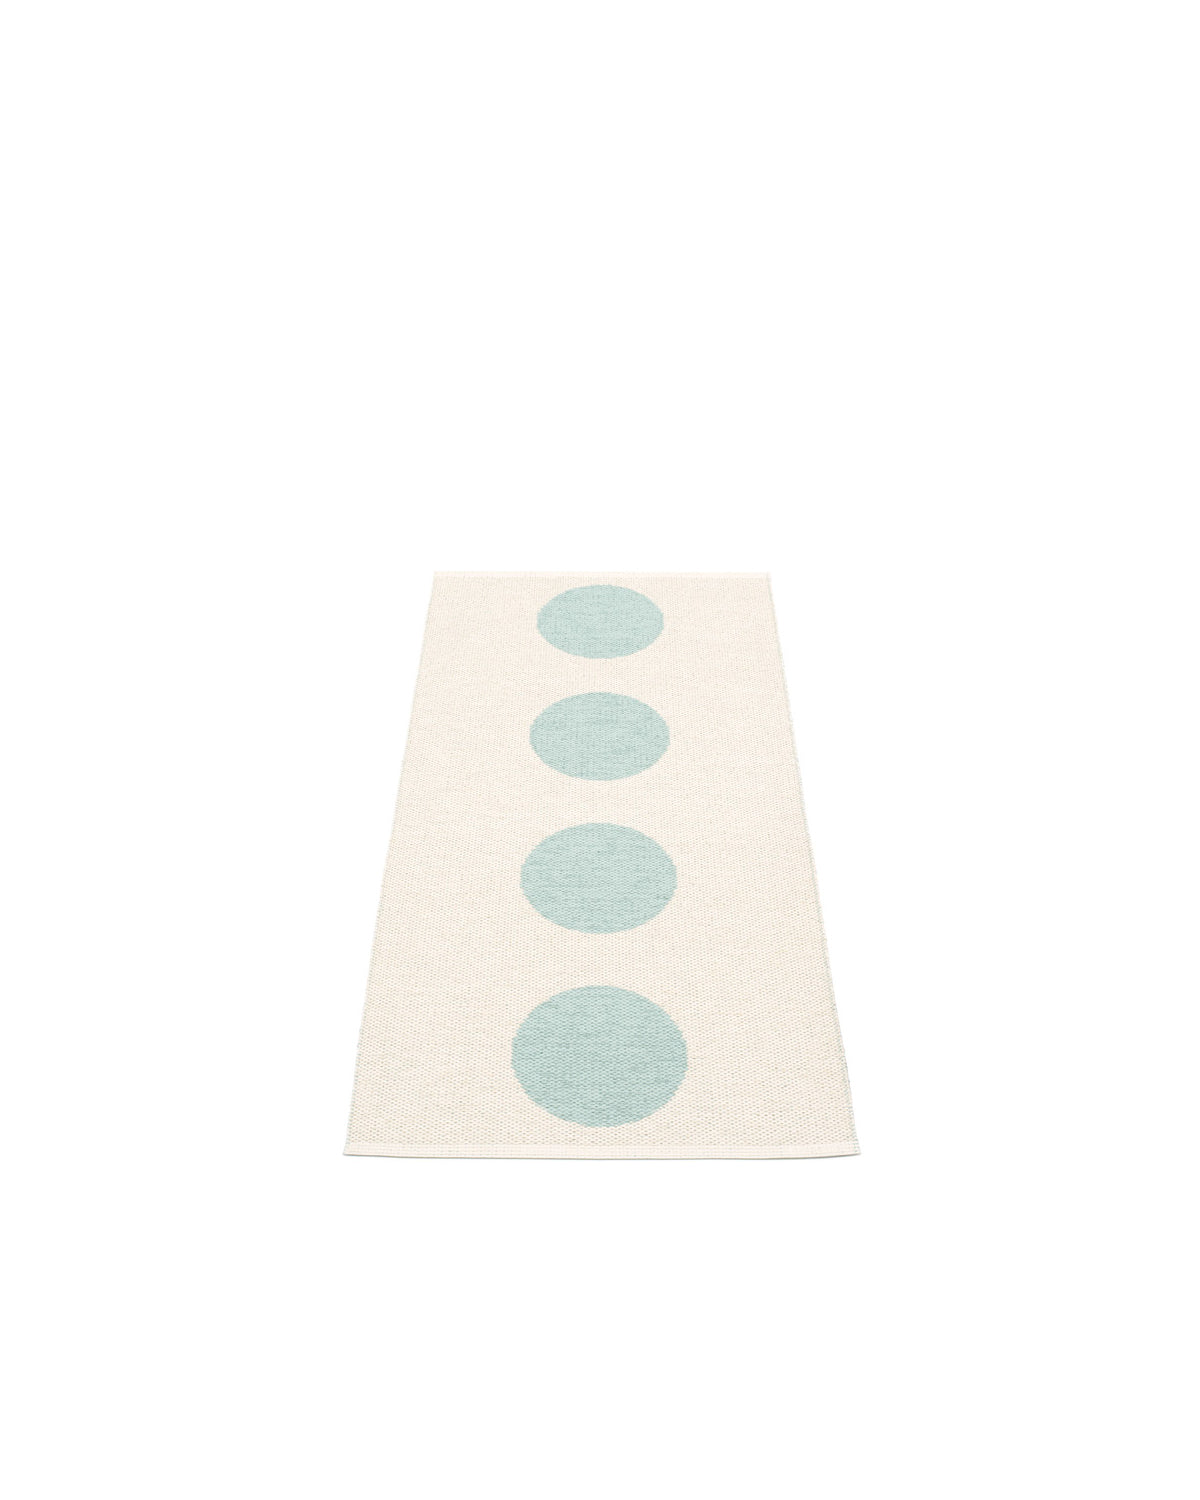 Pappelina Rug VERA Pale Turquoise  image 2